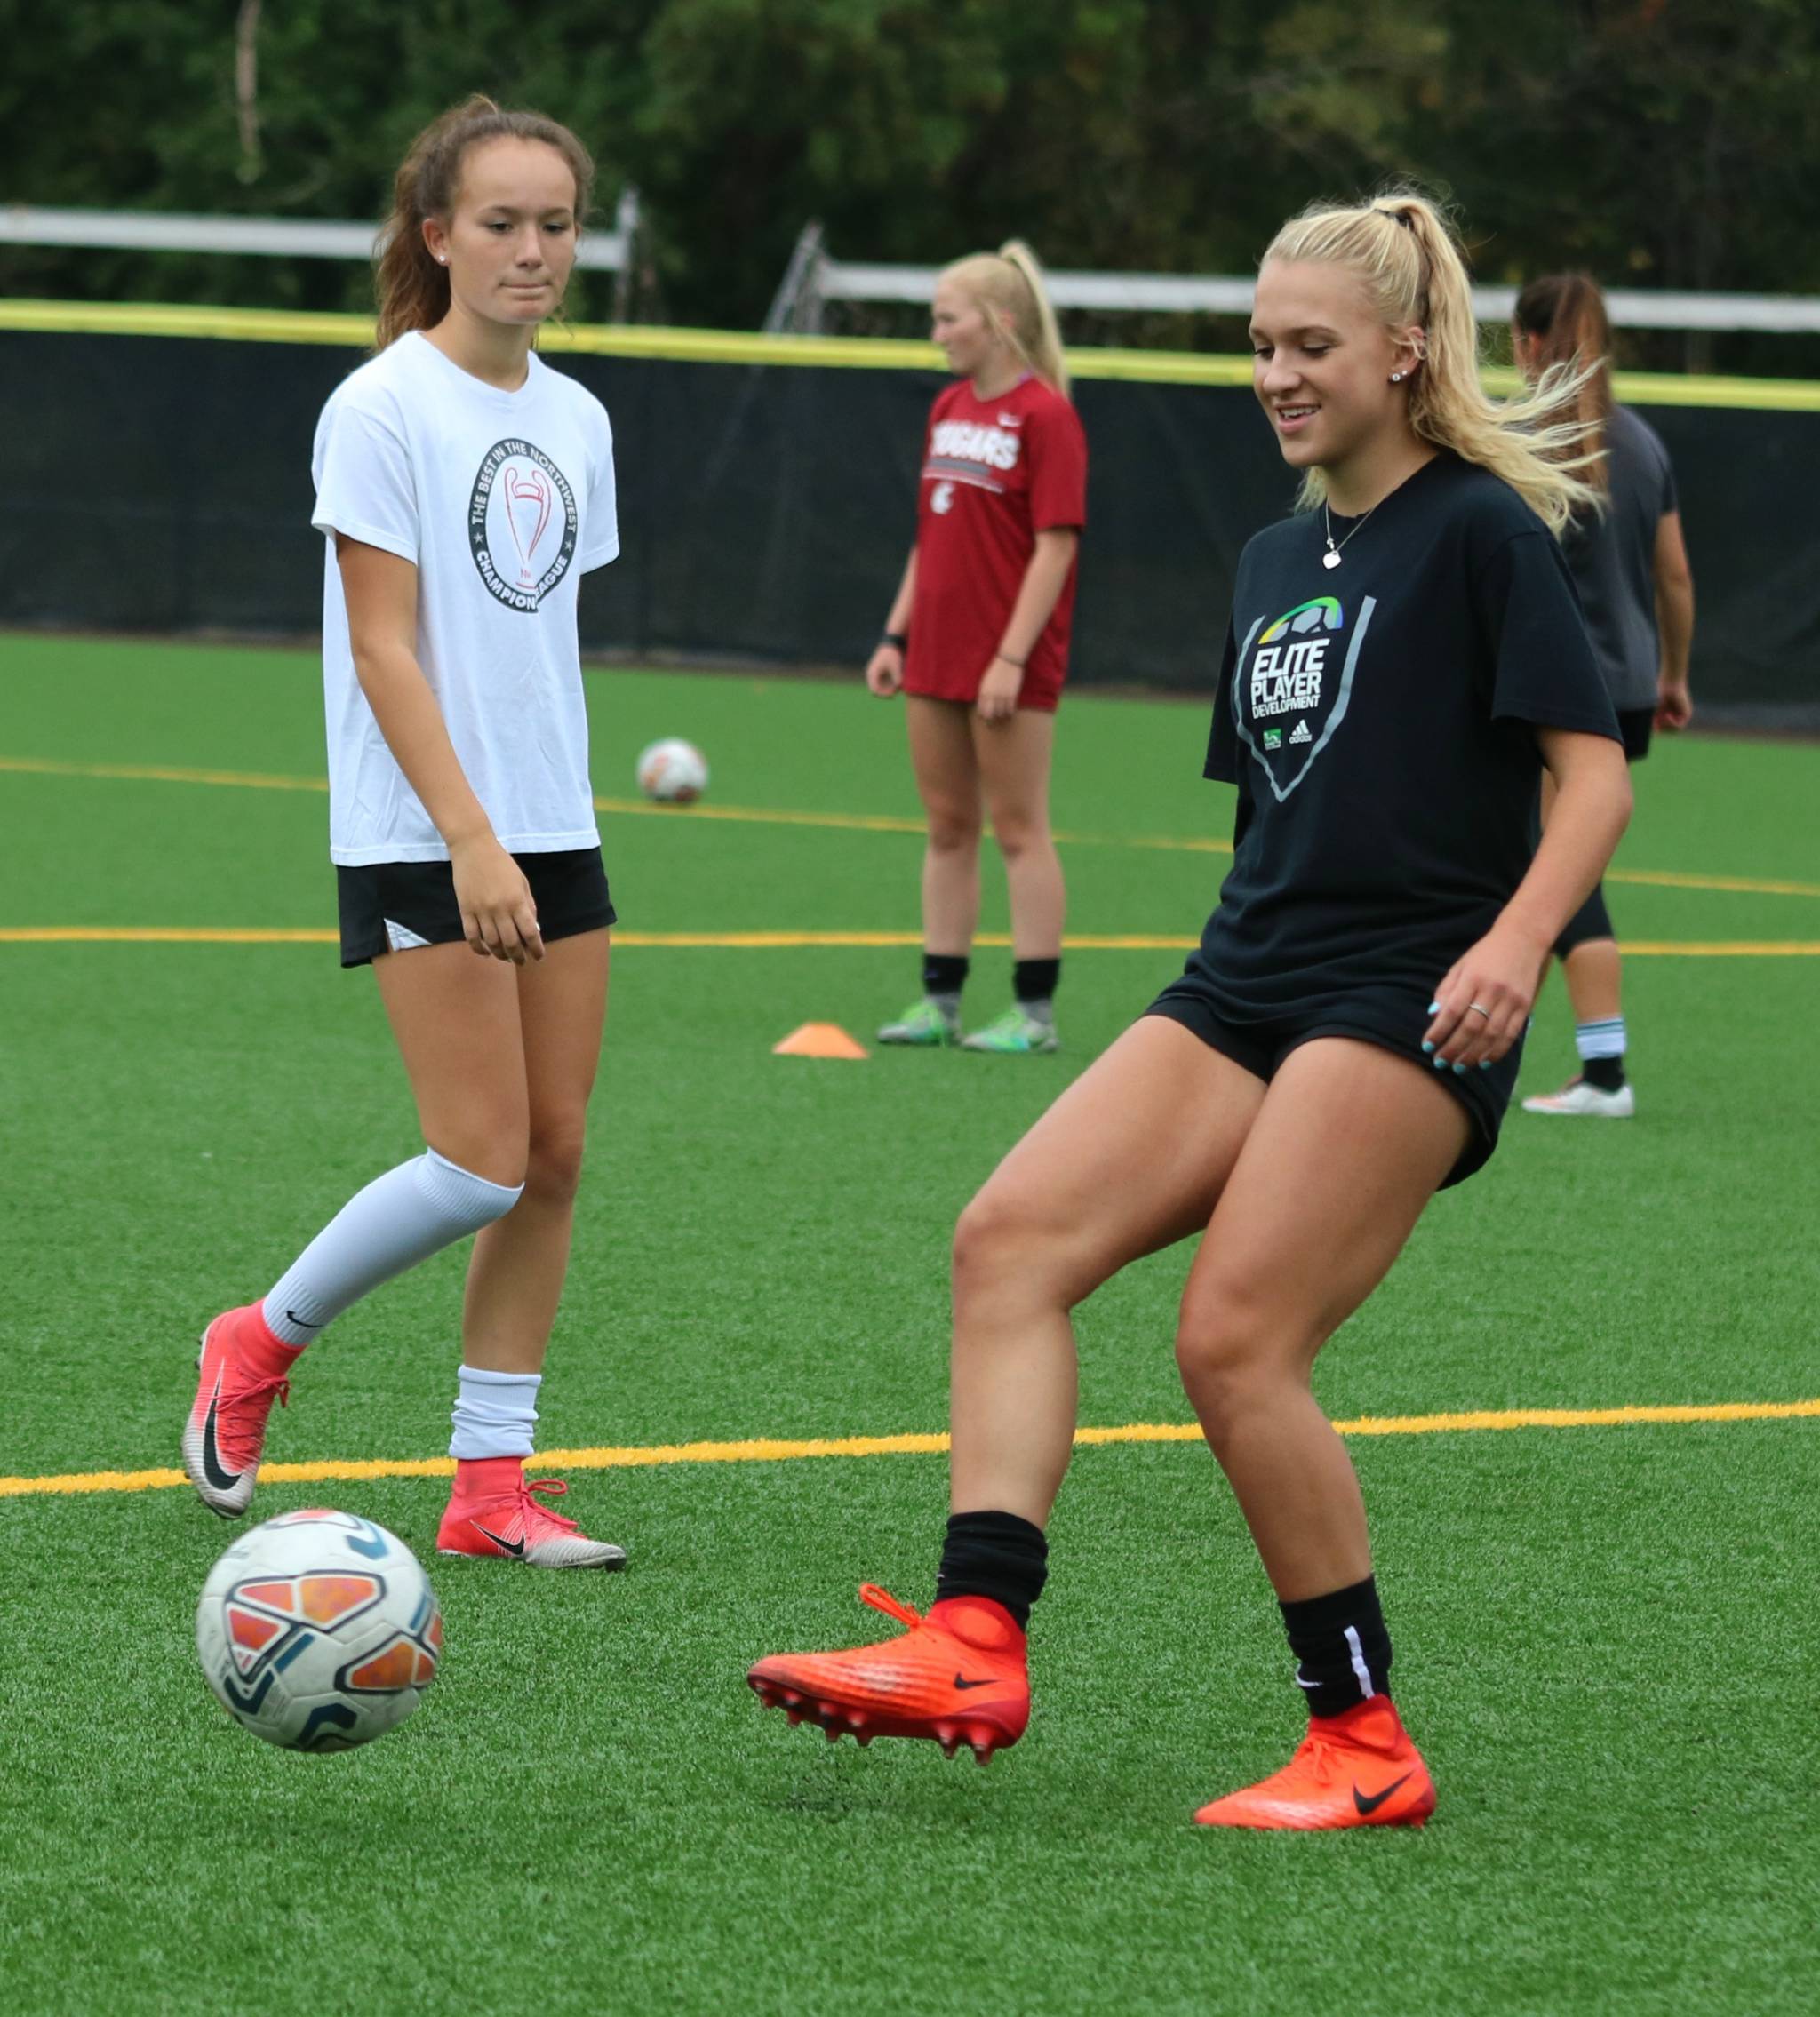 Kelsy Berge, right, kicks the ball while teammate Rachel Conchi watches during last Friday’s practice at Inglemoor High. Andy Nystrom, Bothell-Kenmore Reporter